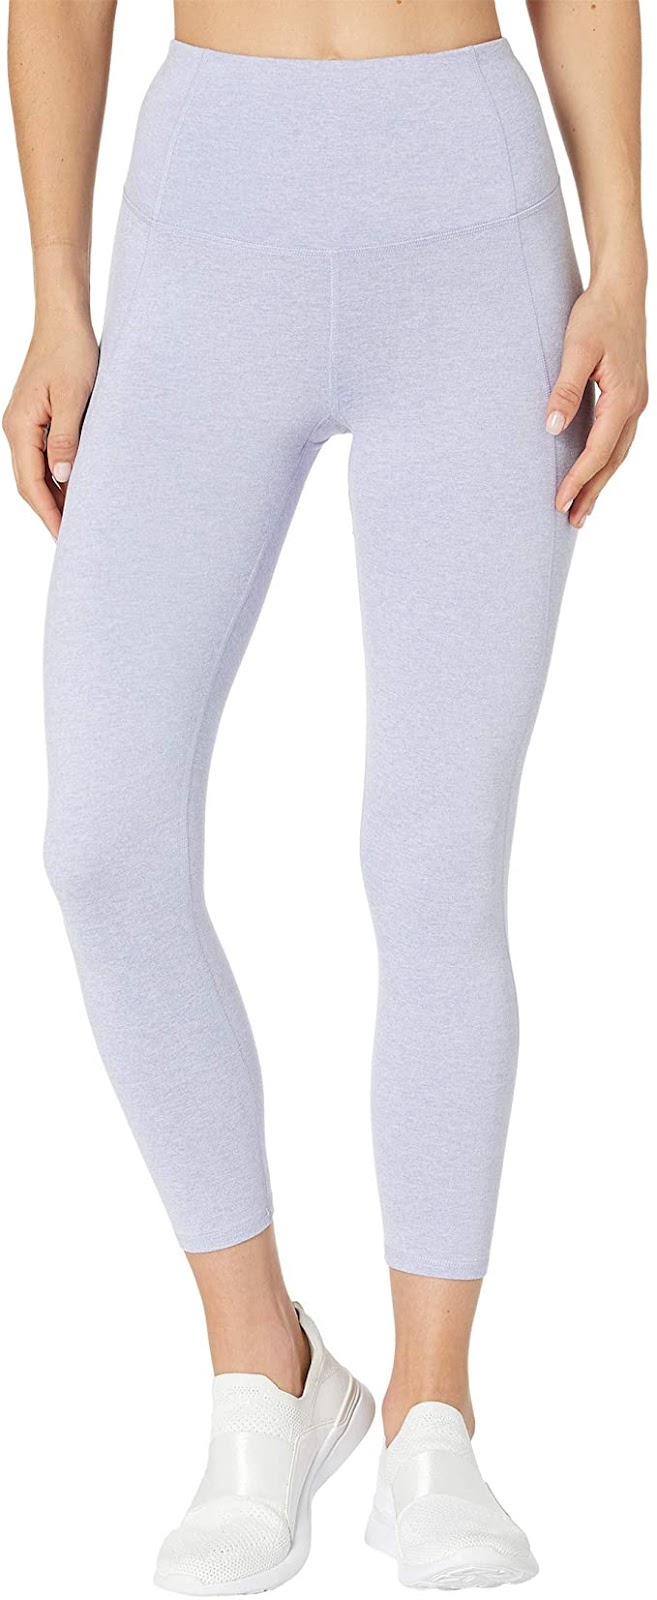 Champion Women's Soft Touch 3/4 Tight